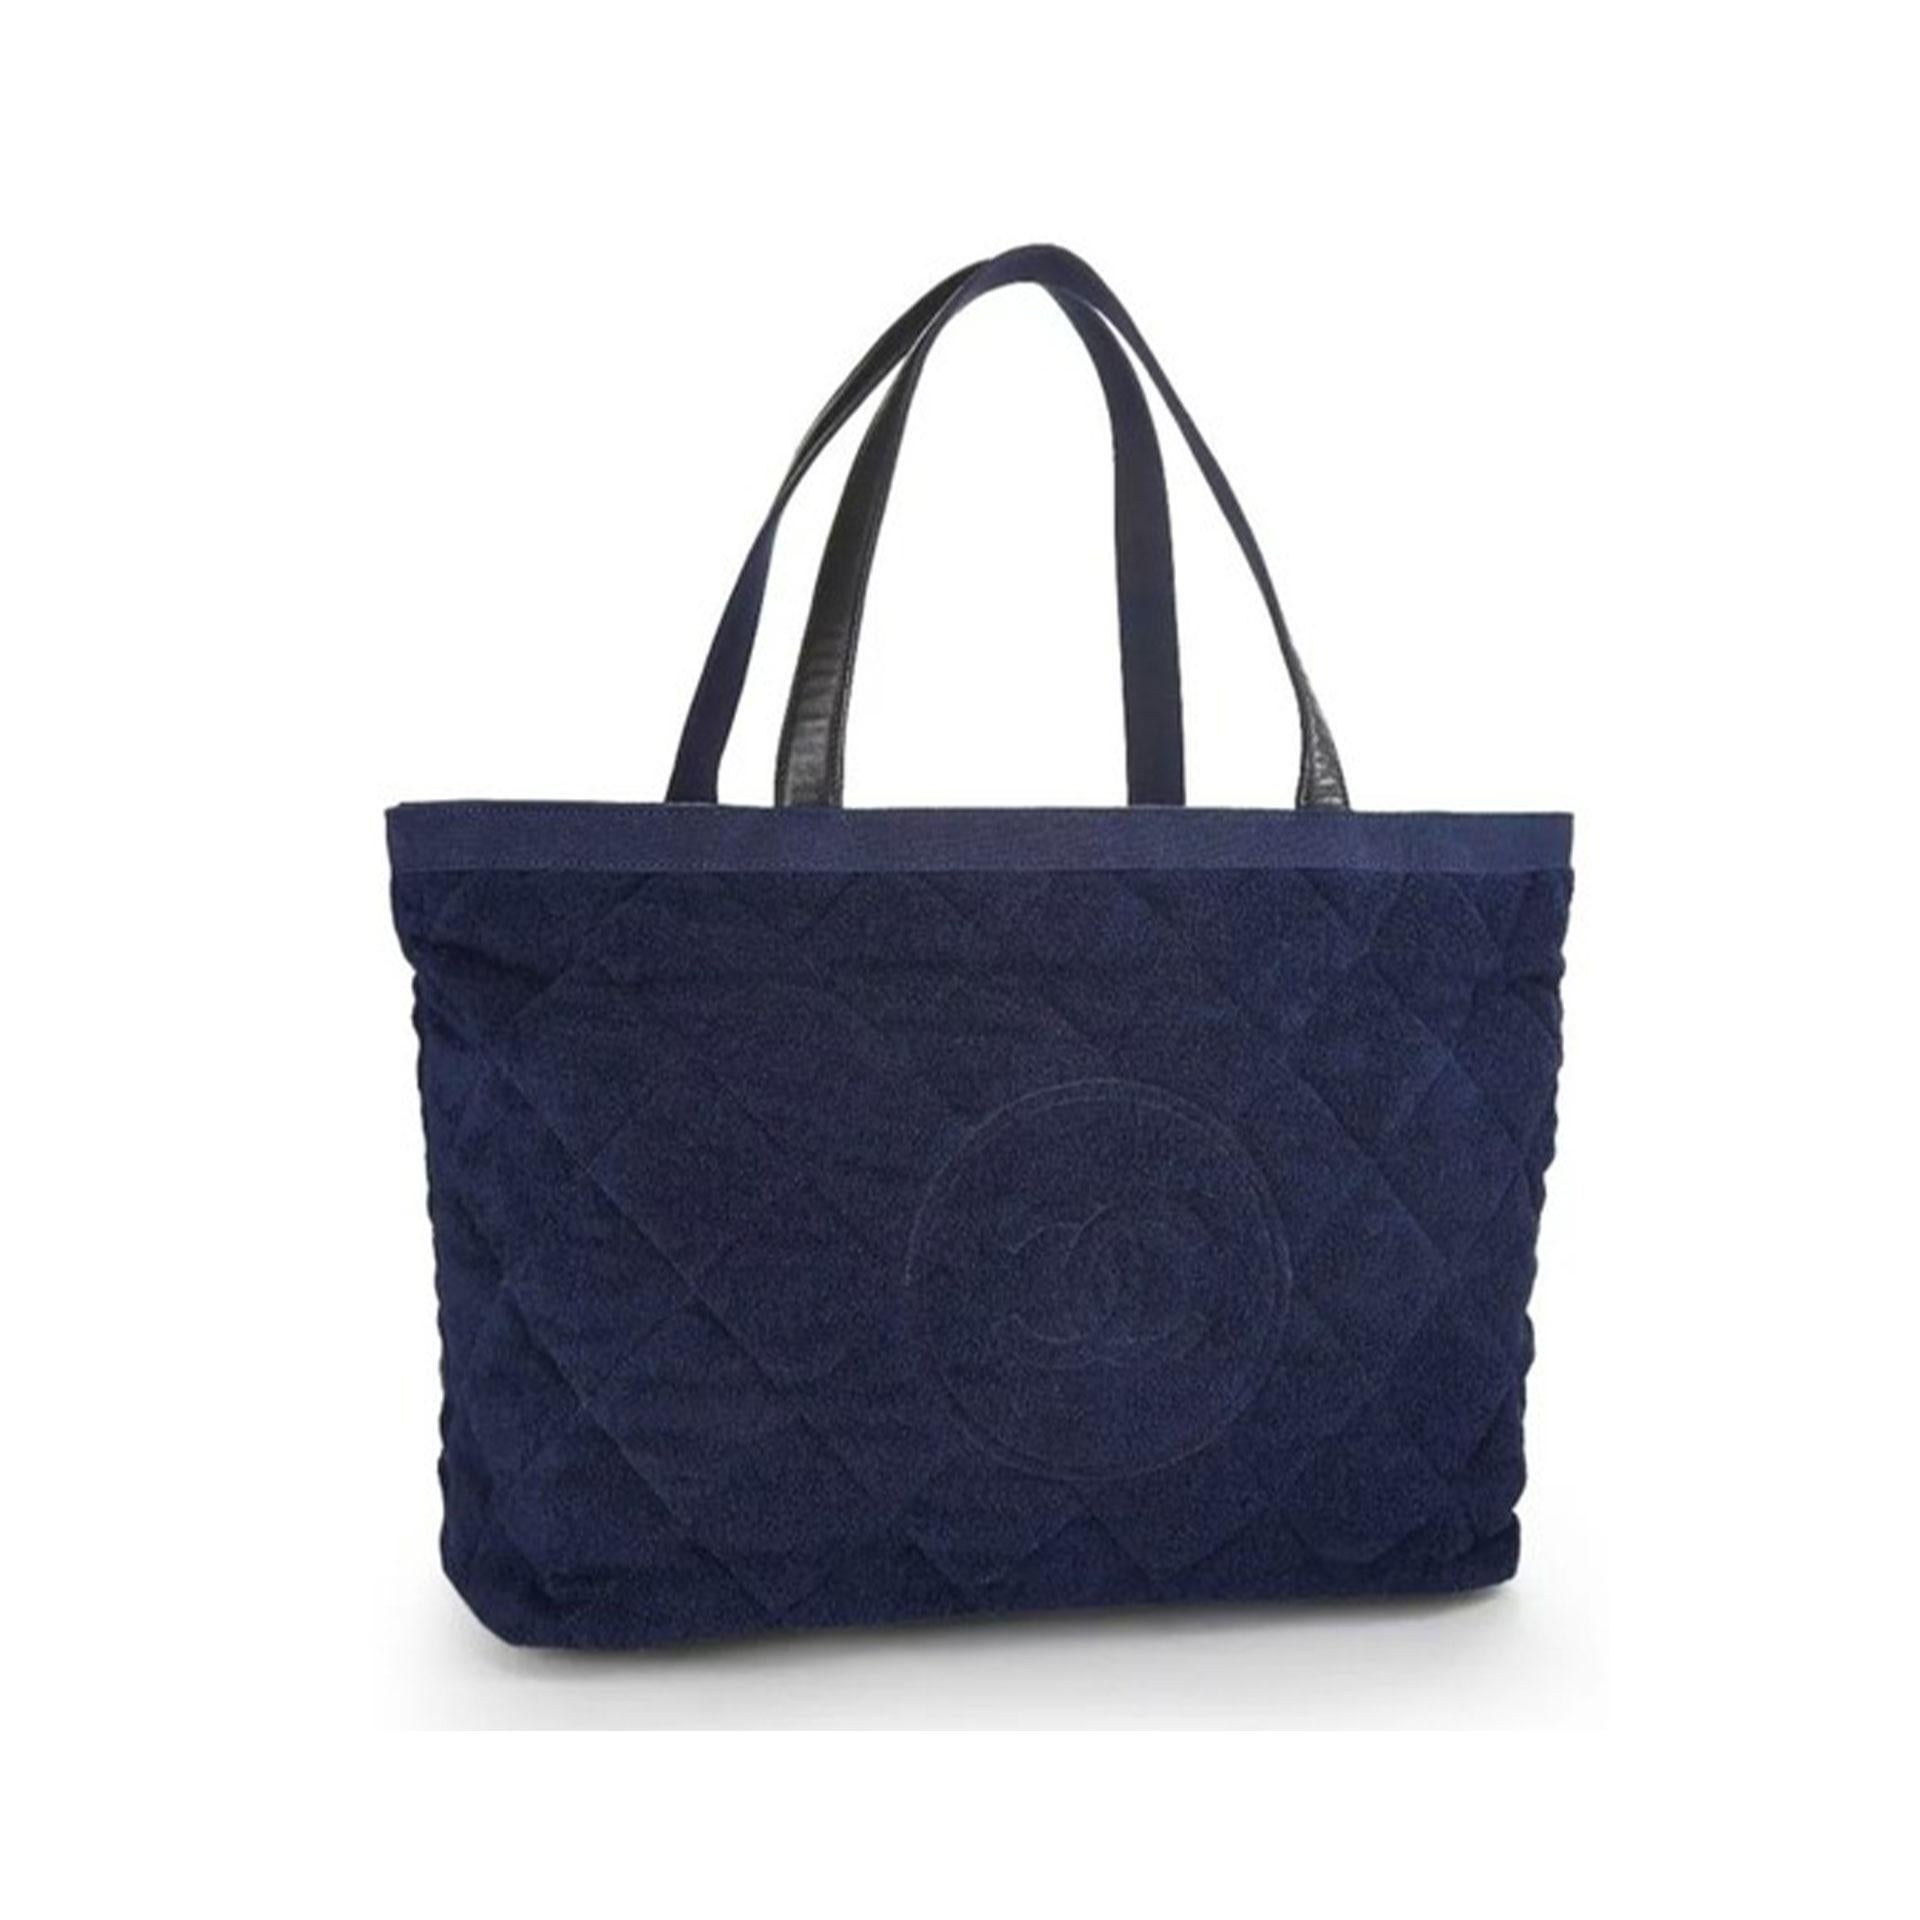 Chanel Limited Edition Navy Blue Quilted CC Logo Quilted Towel Beach Pool Bag

Quilted navy blue terry cloth exterior
CC Logo at exterior
Two calfskin leather shoulder straps
Lined in soft terry velour
Main interior zipper pocket
12.5